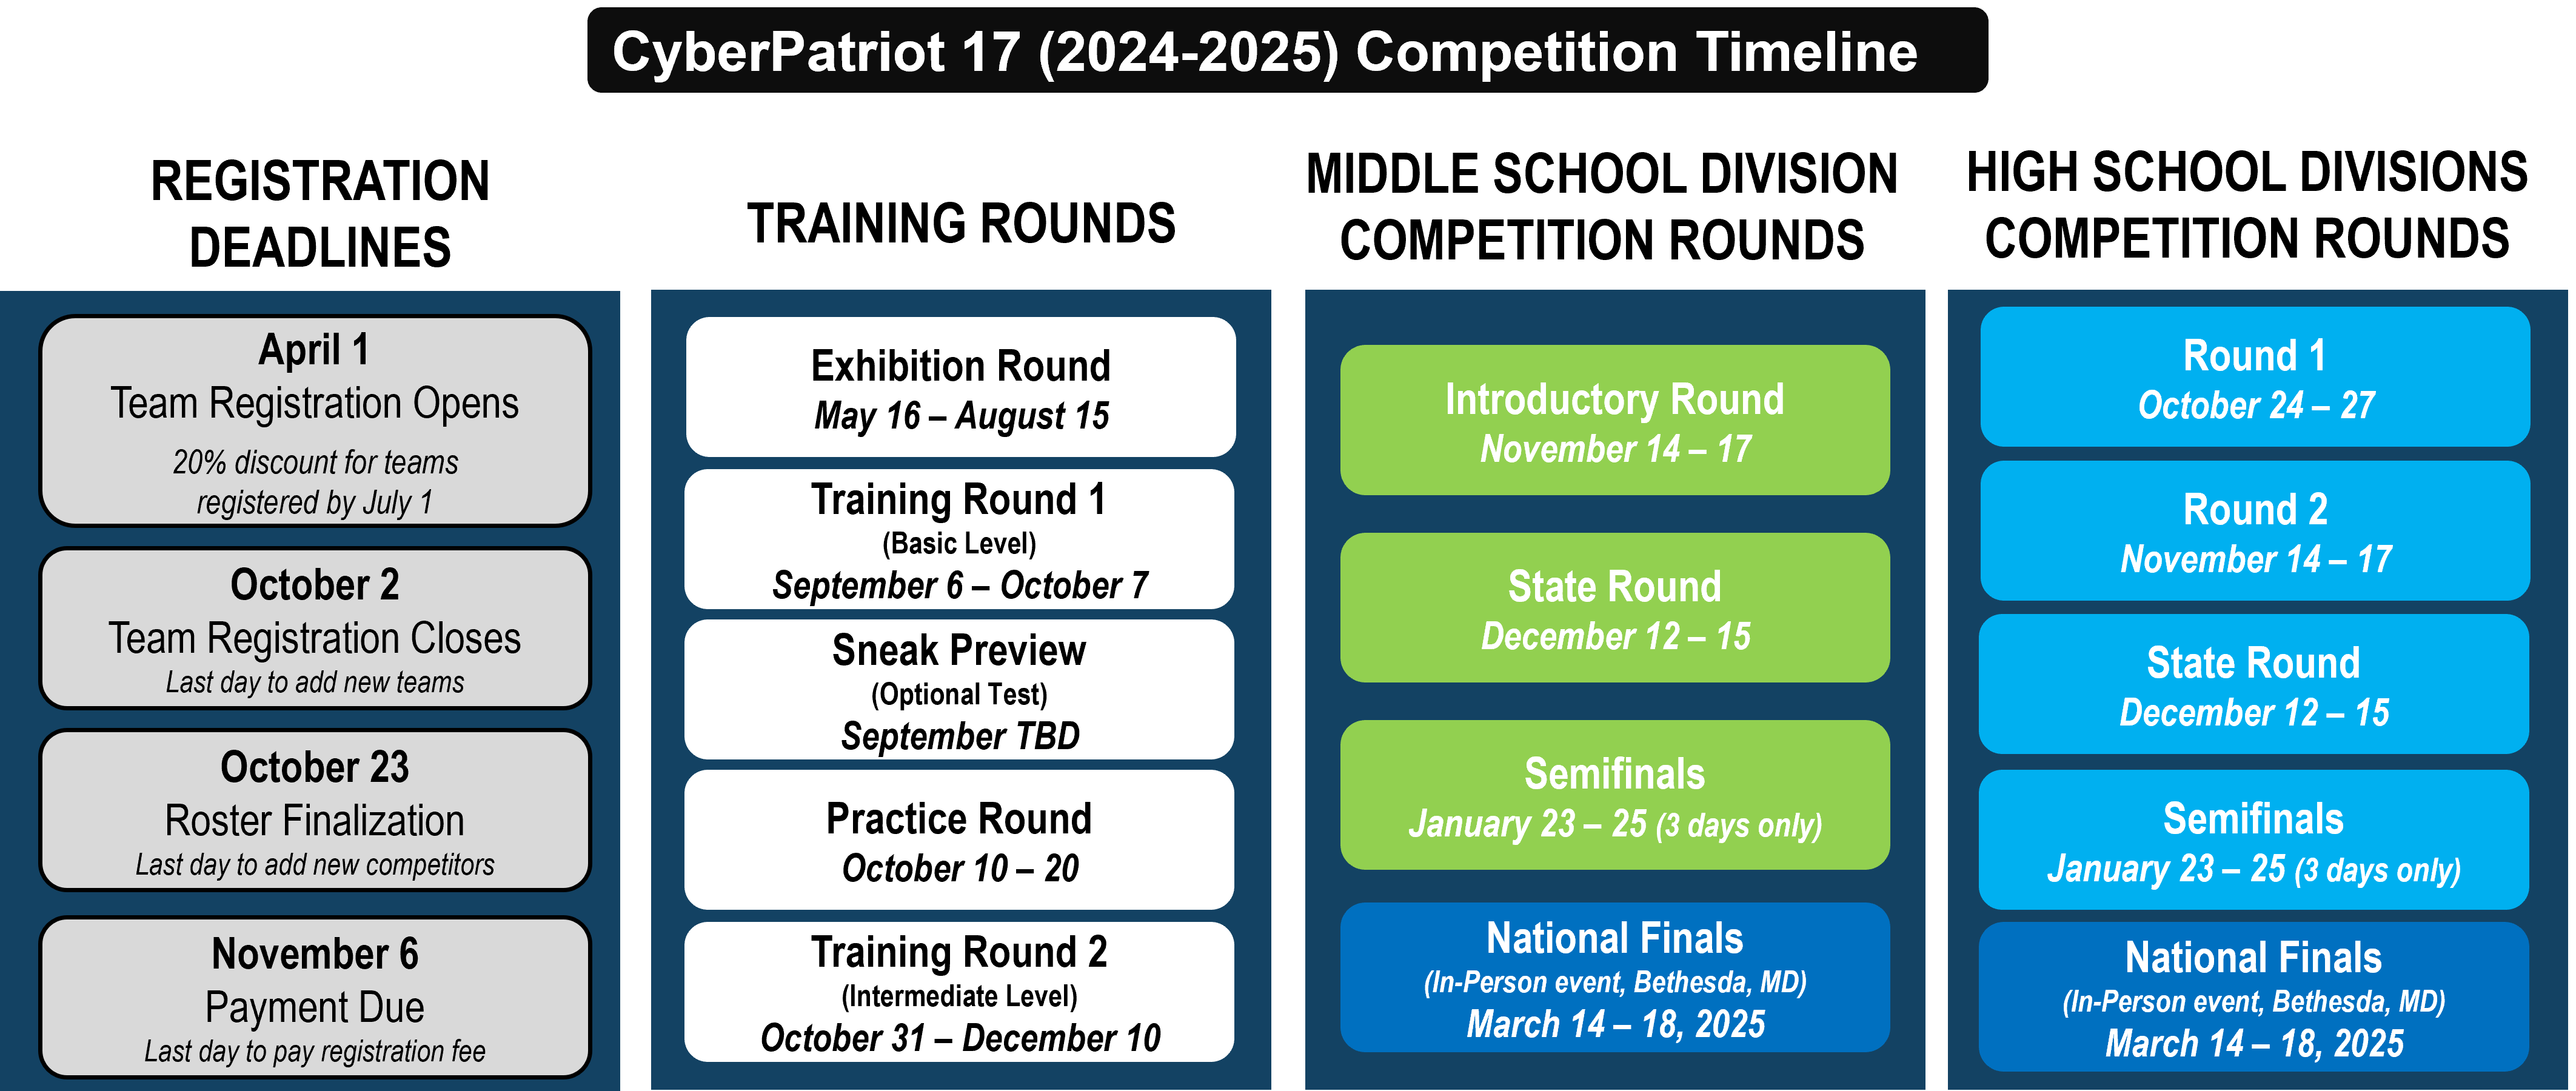 CP17 competition timeline.png